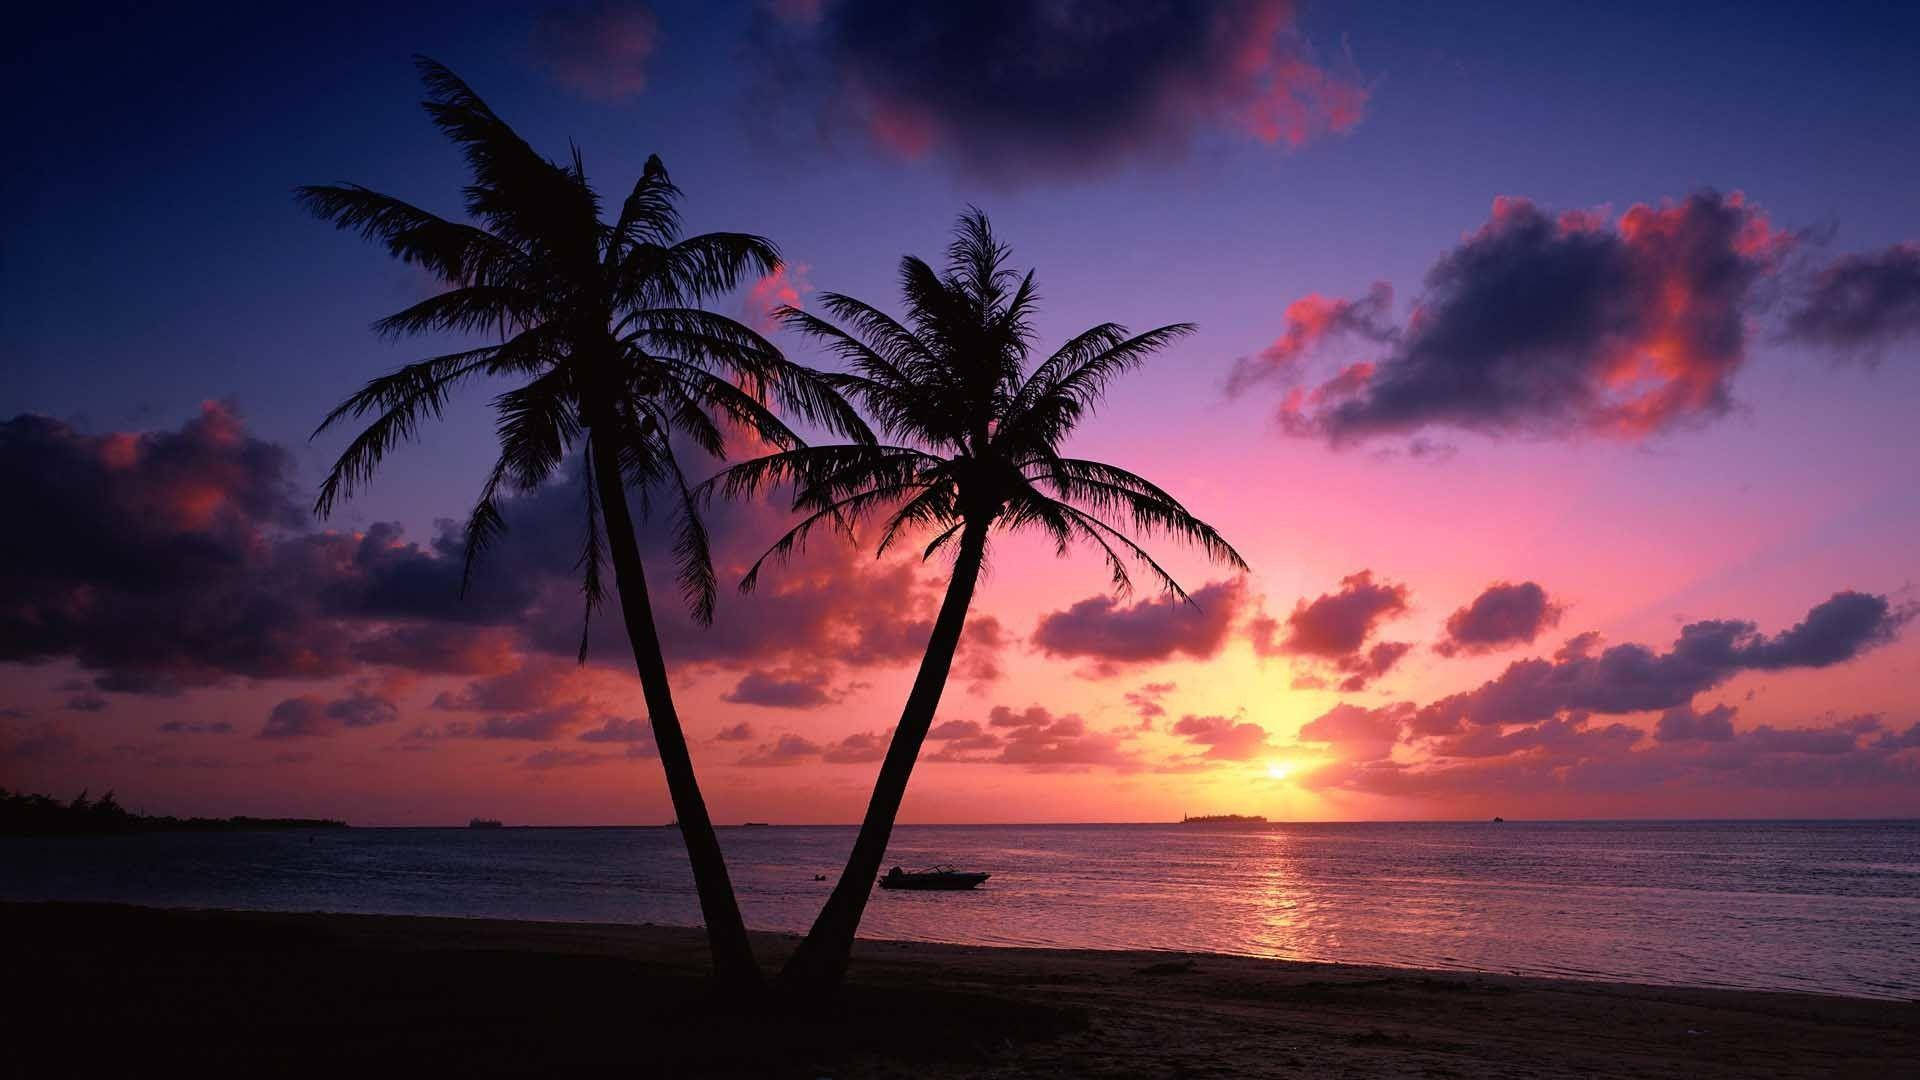 Aesthetic Sunset With Palm Tree Silhouettes Wallpaper